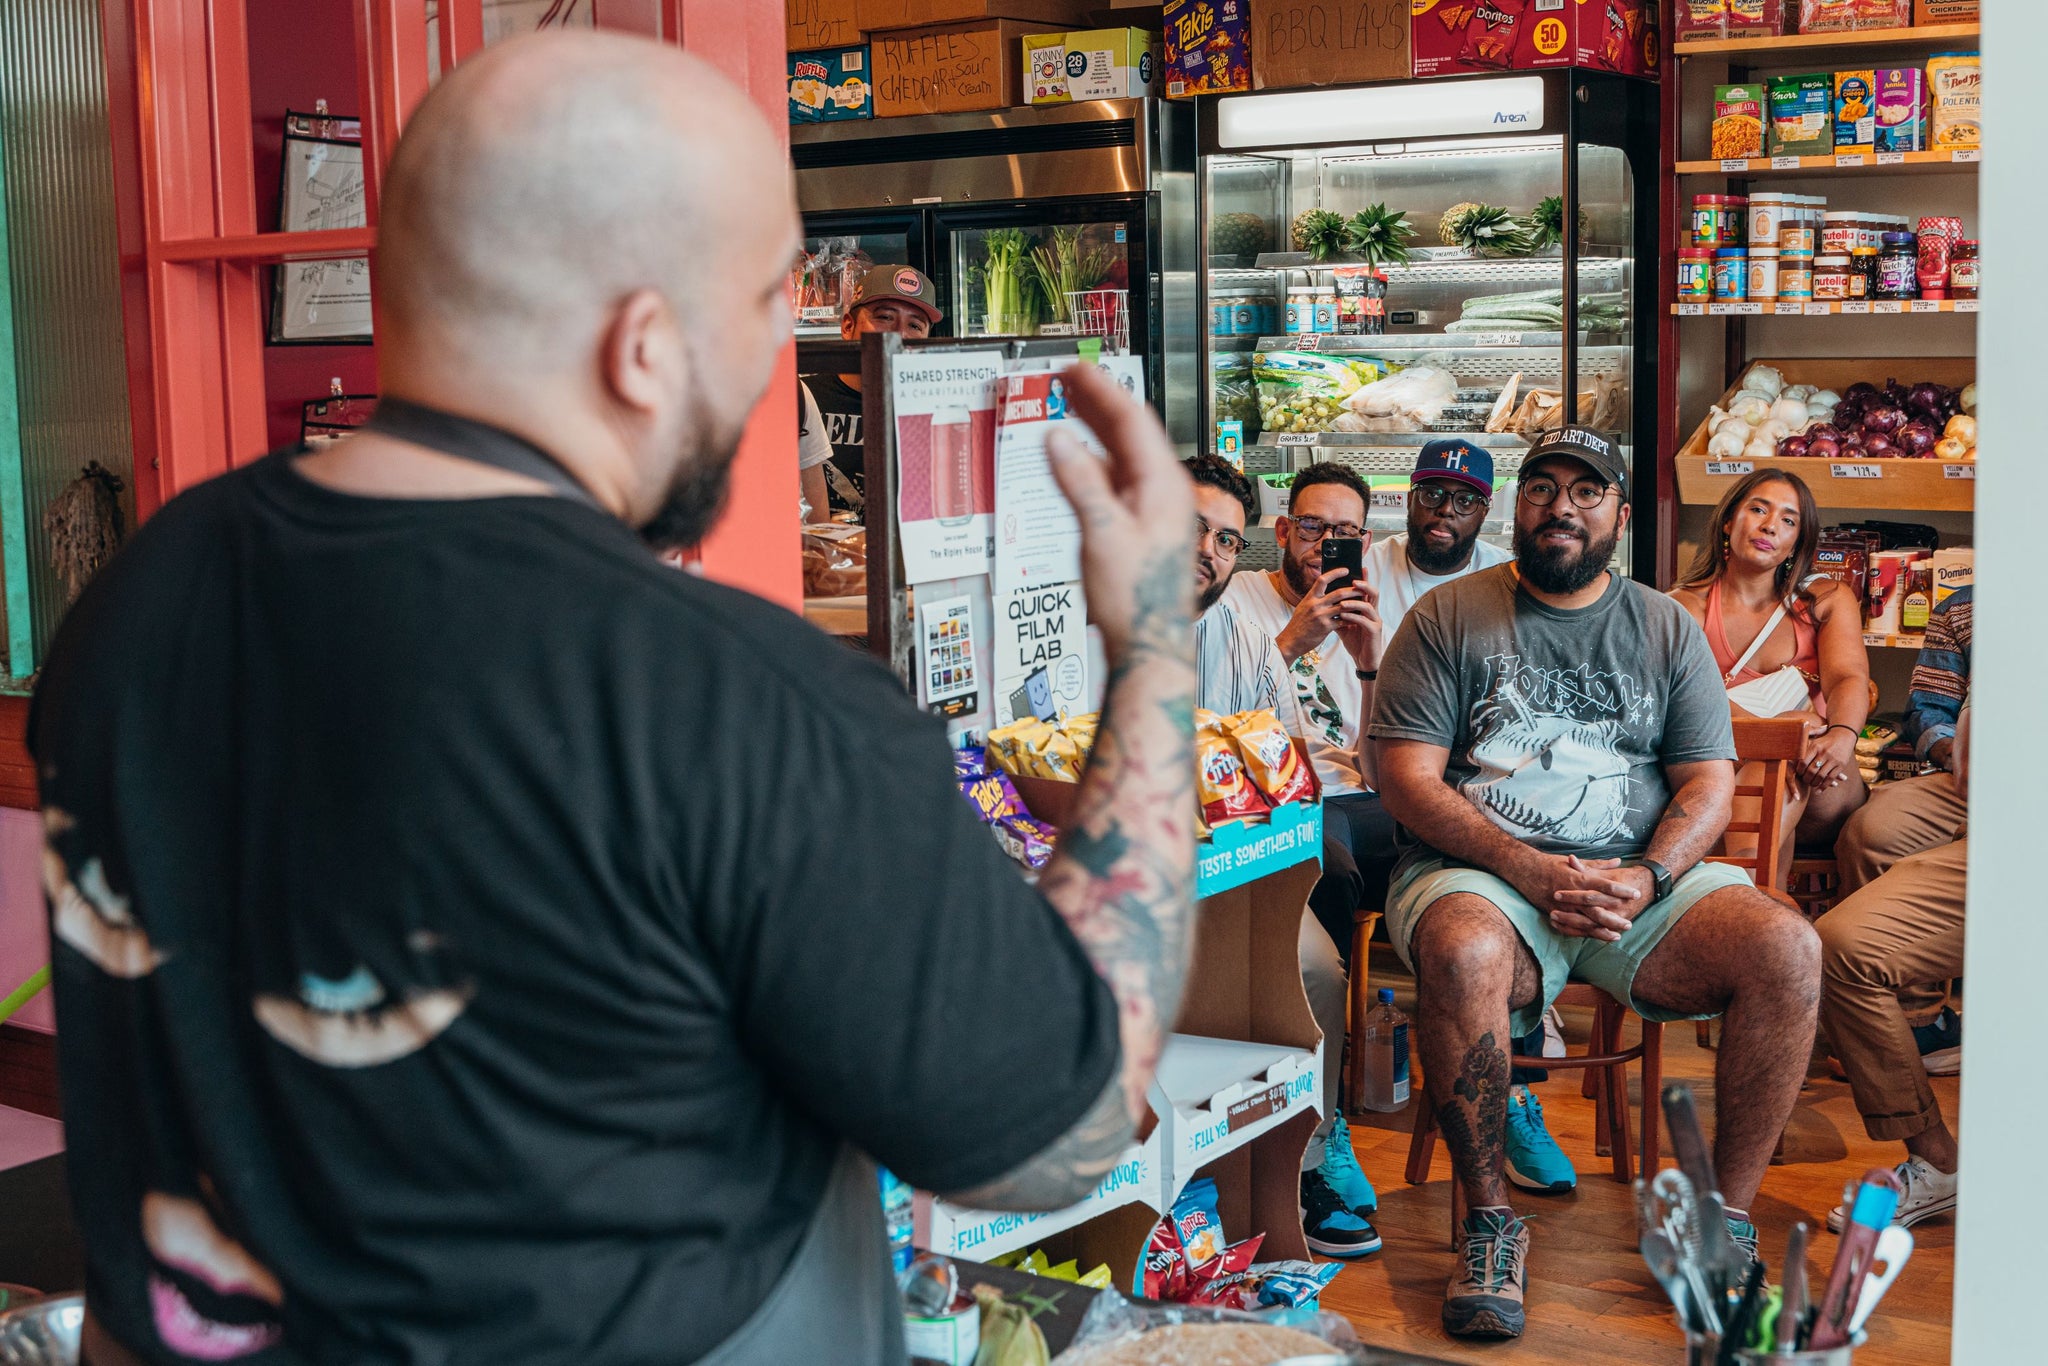 Chef Nieves presents to a small audience inside a grocery store